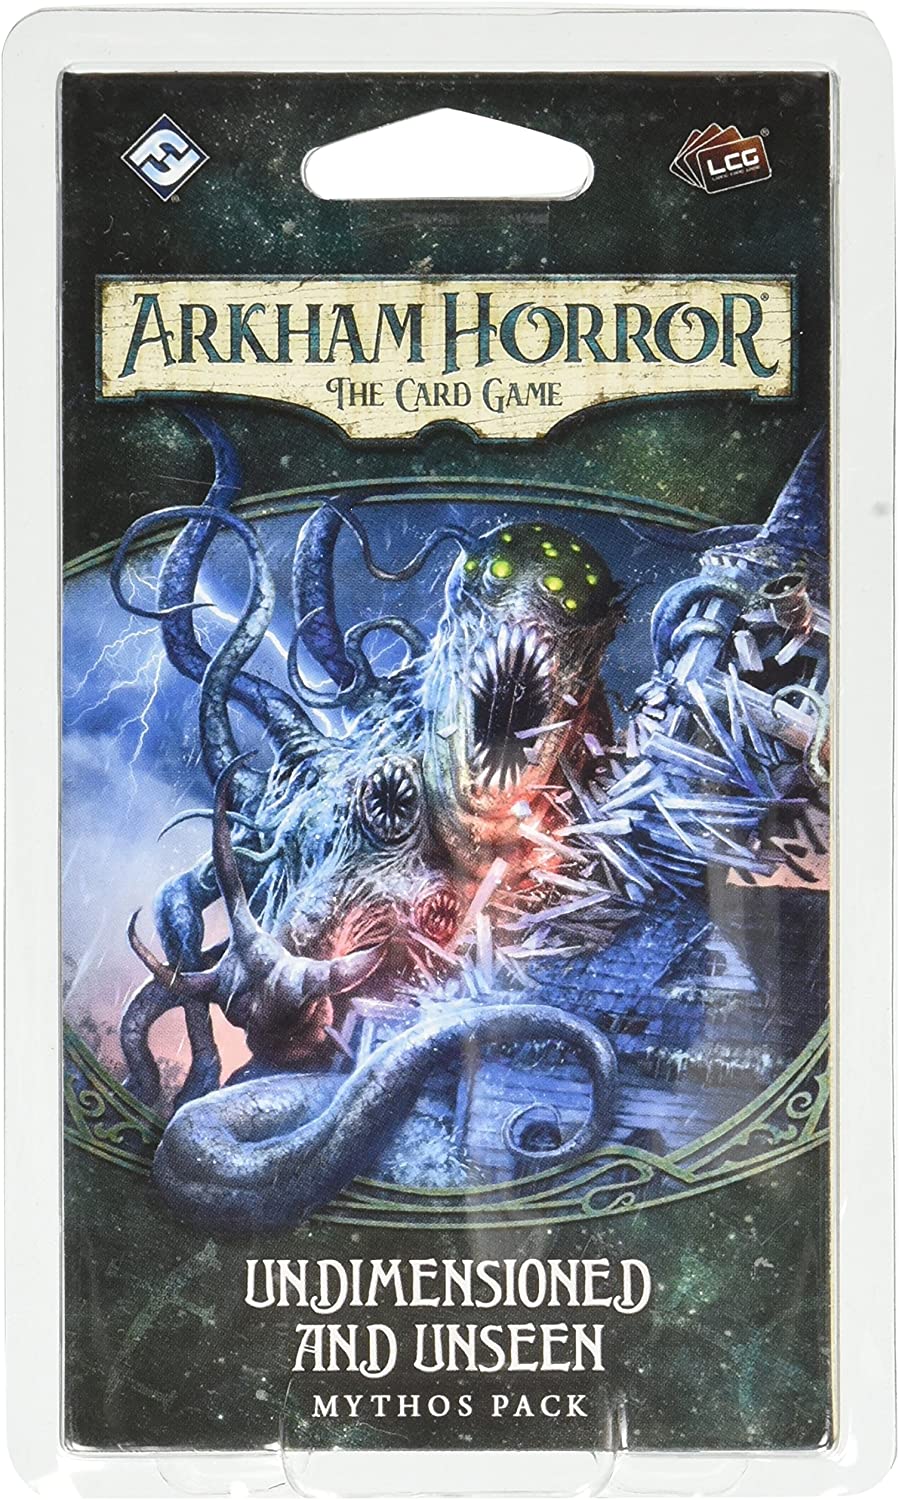 Arkham Horror LCG: Undimensioned and Unseen Mythos Pack Expansion